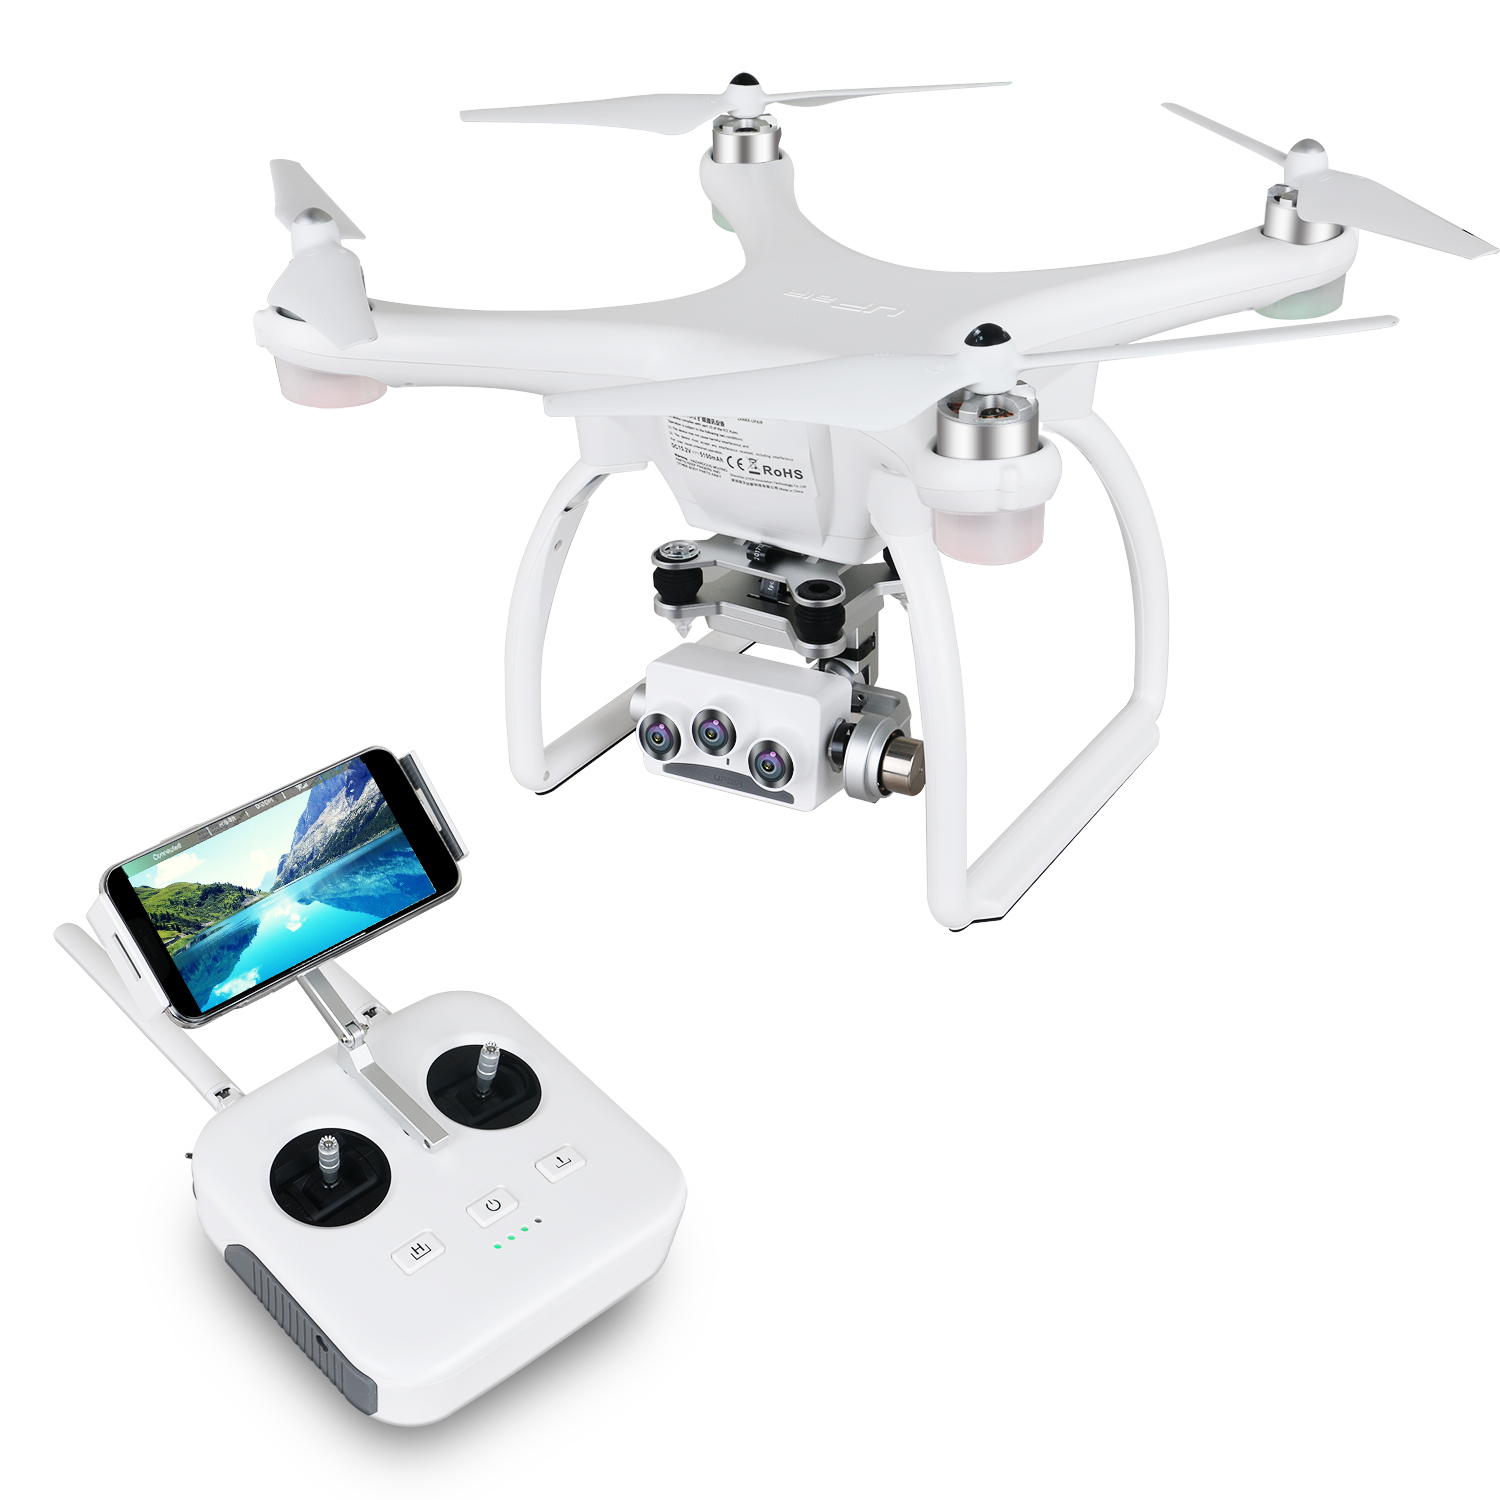 UPair-2-Ultrasonic-58G-WiFi-1KM-FPV-3D--4K--16MP-Camera-With-3-Axis-Gimbal-GPS-RC-Quadcopter-Drone-R-1440618-1